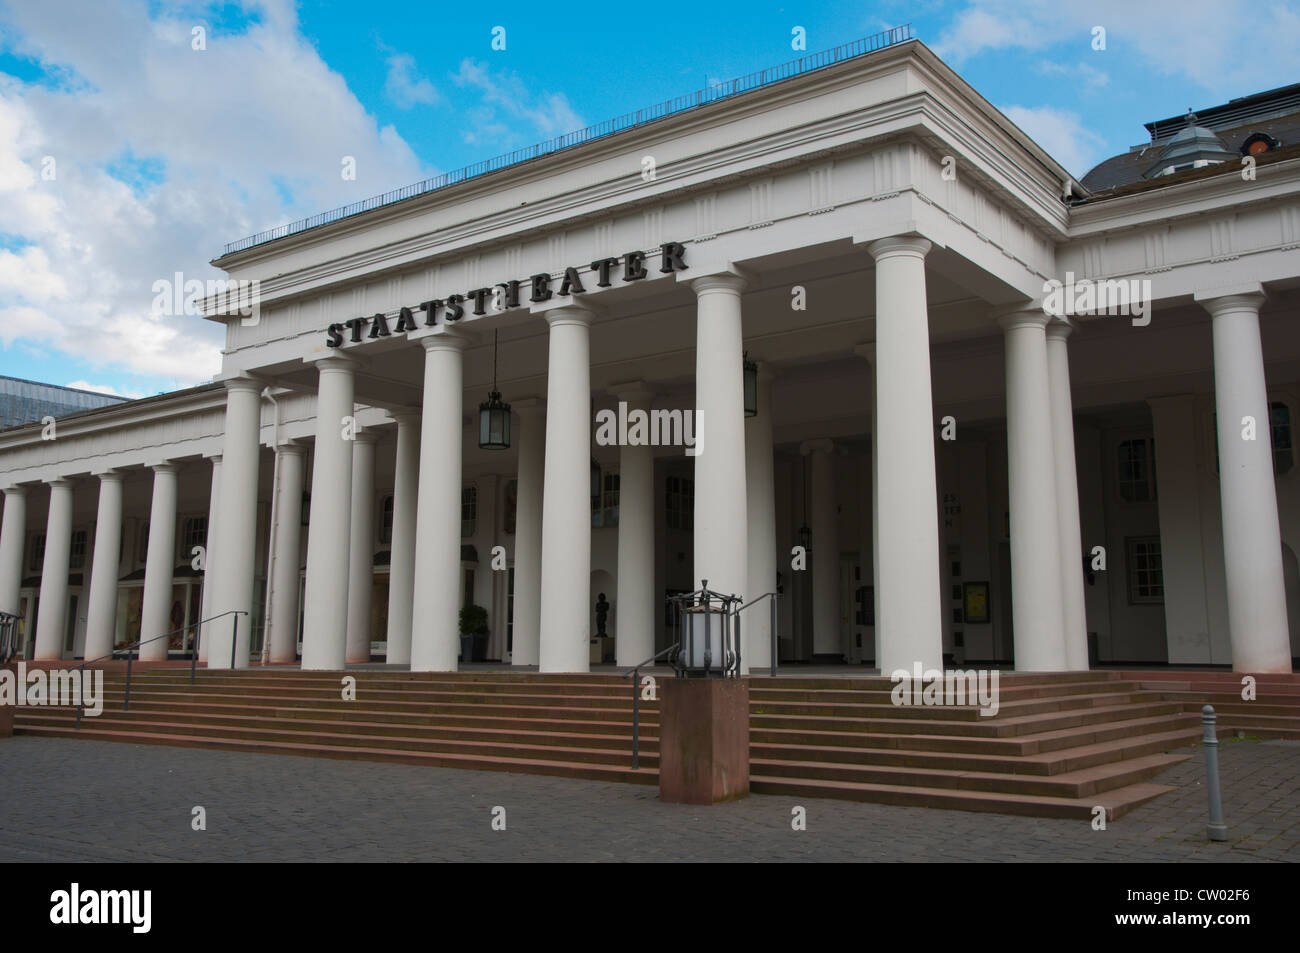 Hessisches Staatstheater on Bowling Green side Wiesbaden city state of Hesse Germany Europe Stock Photo